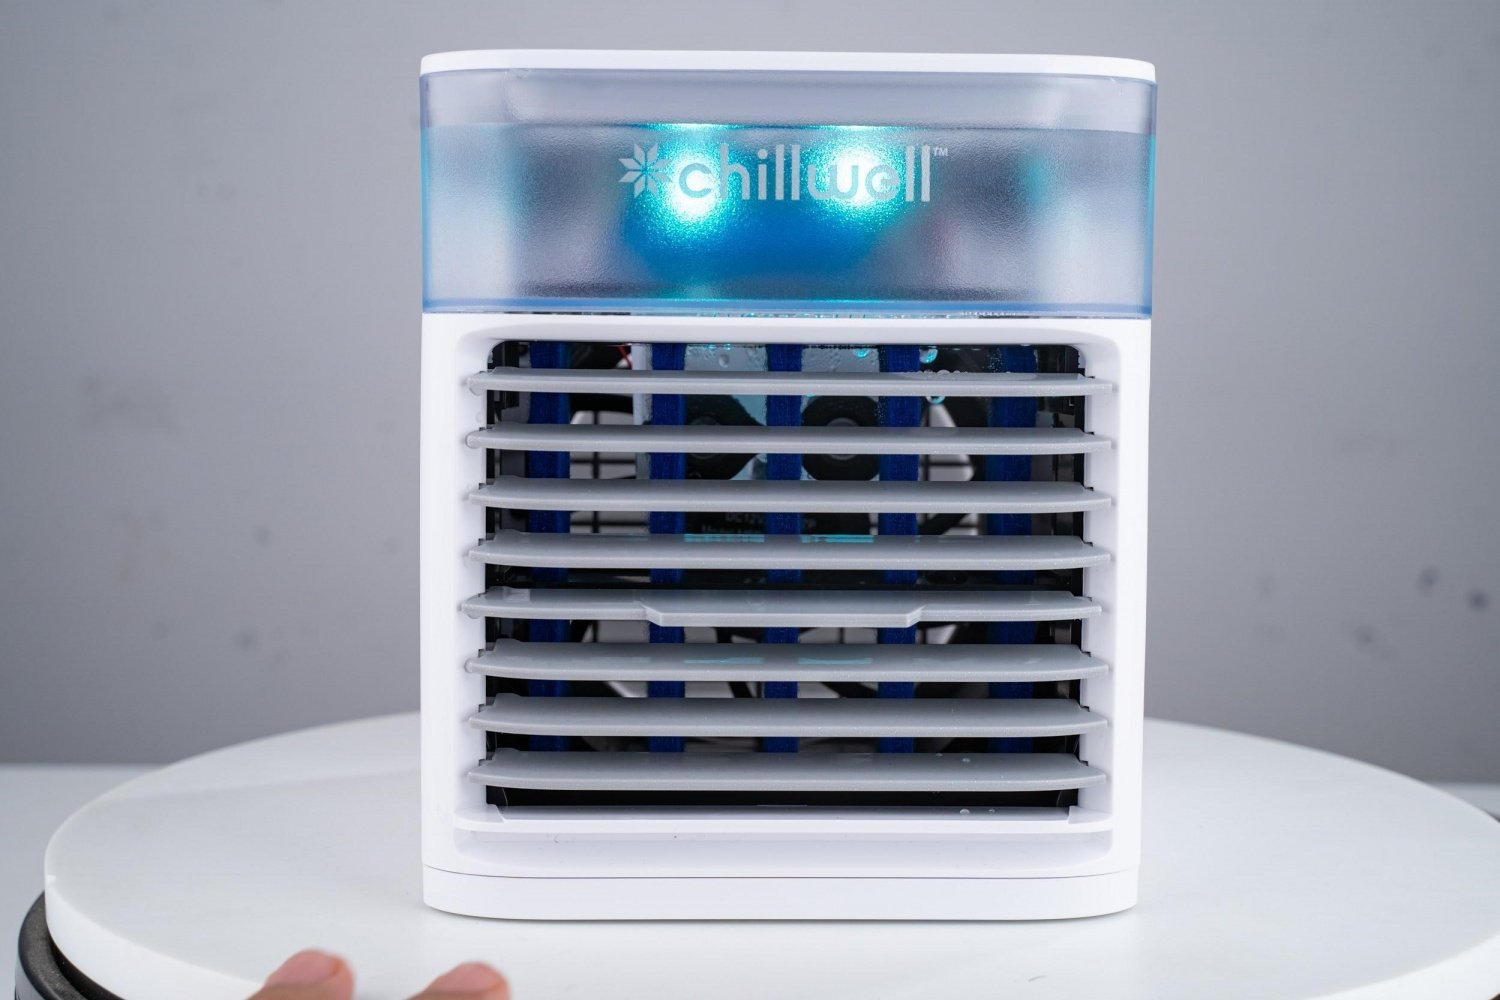 Chillwell AC Portable Air Conditioner Unit